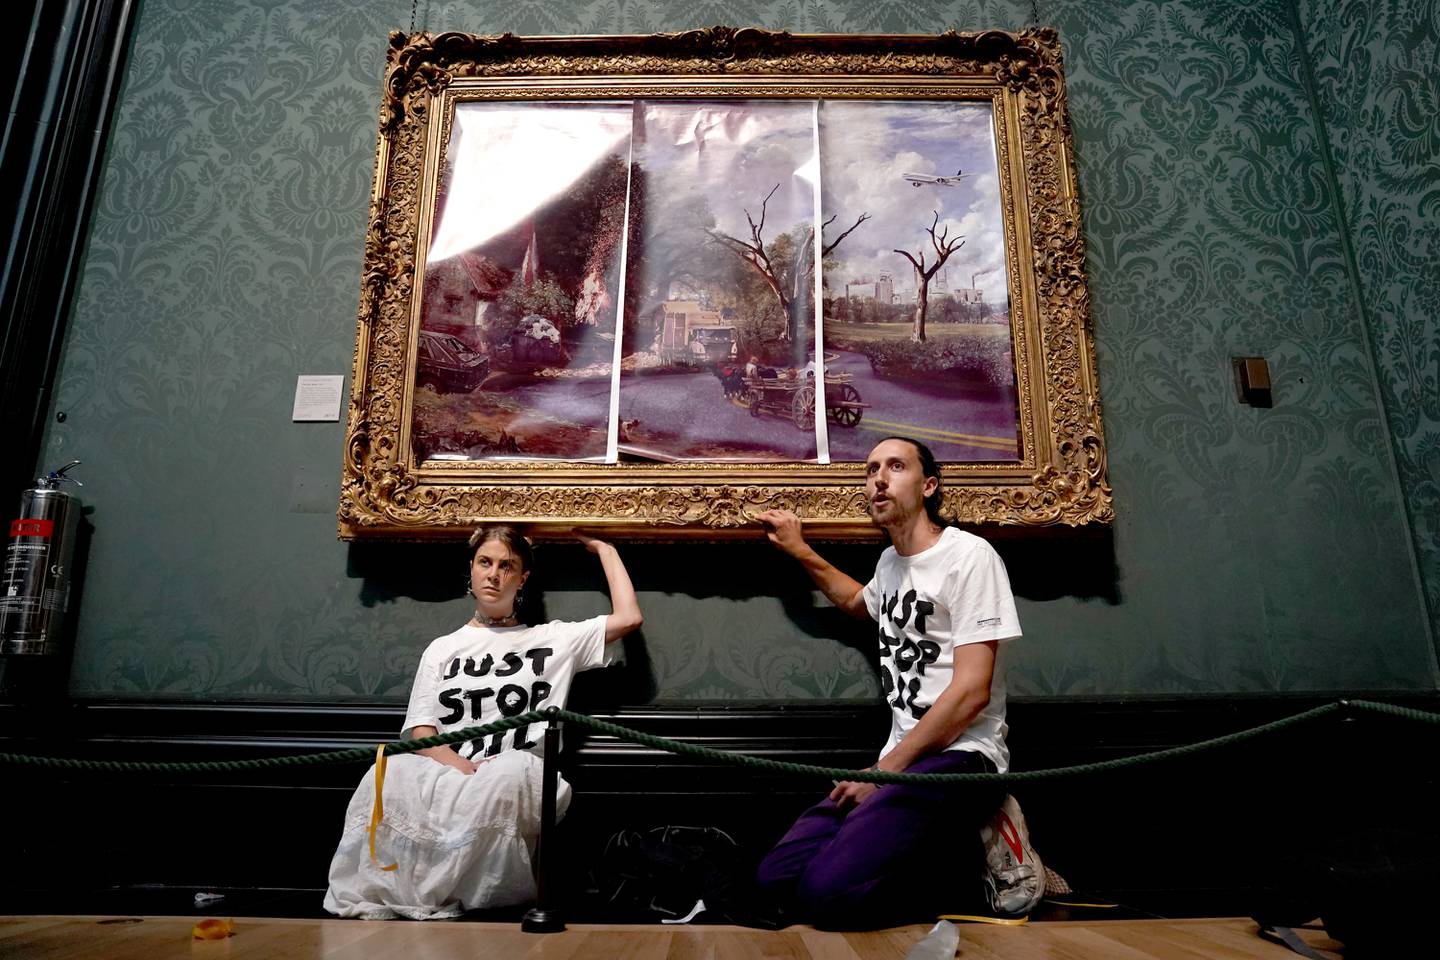 The Just Stop Oil climate group said it was behind the protest at London's National Gallery. PA